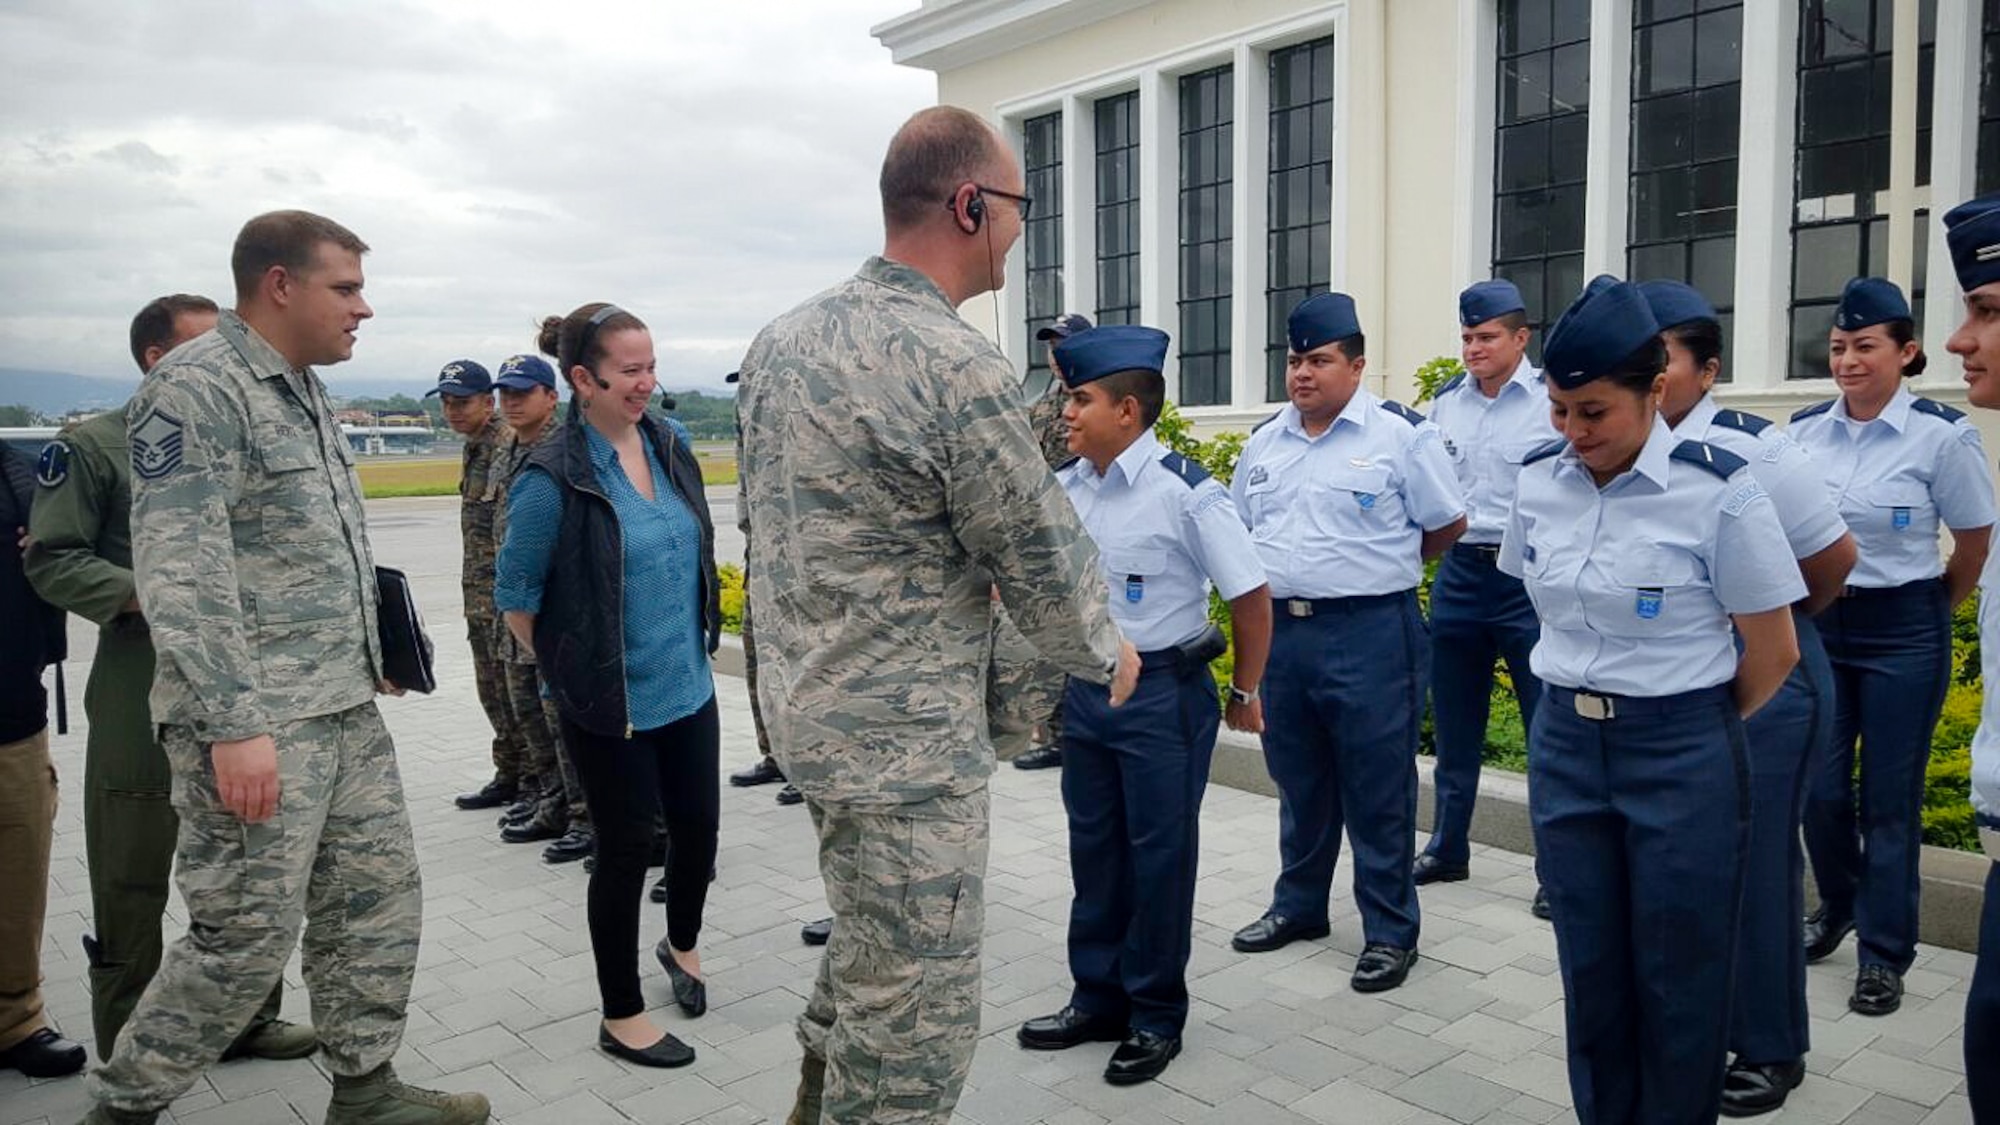 Lt. Col. Eric Corder, assistant director of operations for the 225th Air Defense Squadron, greets members of the Guatemalan Air Force Aug. 25, 2017.  As part of the State Partnership Program visit, Corder leveraged his 28 years of air defense expertise to provide feedback about the functionality and validity of the Guatemalan national air defense network.  The SPP links a state's National Guard with the armed forces of a partner country in a cooperative, mutually beneficial relationship by means of tailored, small footprint, high-impact security cooperation engagements that foster long-term enduring relationships with U.S. friends and allies around the world.  The SPP arose from a 1991 U.S. European Command decision to pair reserve component soldiers and airmen with the armed forces of the then newly formed nations of the Baltic Region following the collapse of the Soviet Bloc. (U.S. Air Force photo by Major Alexander Hau)